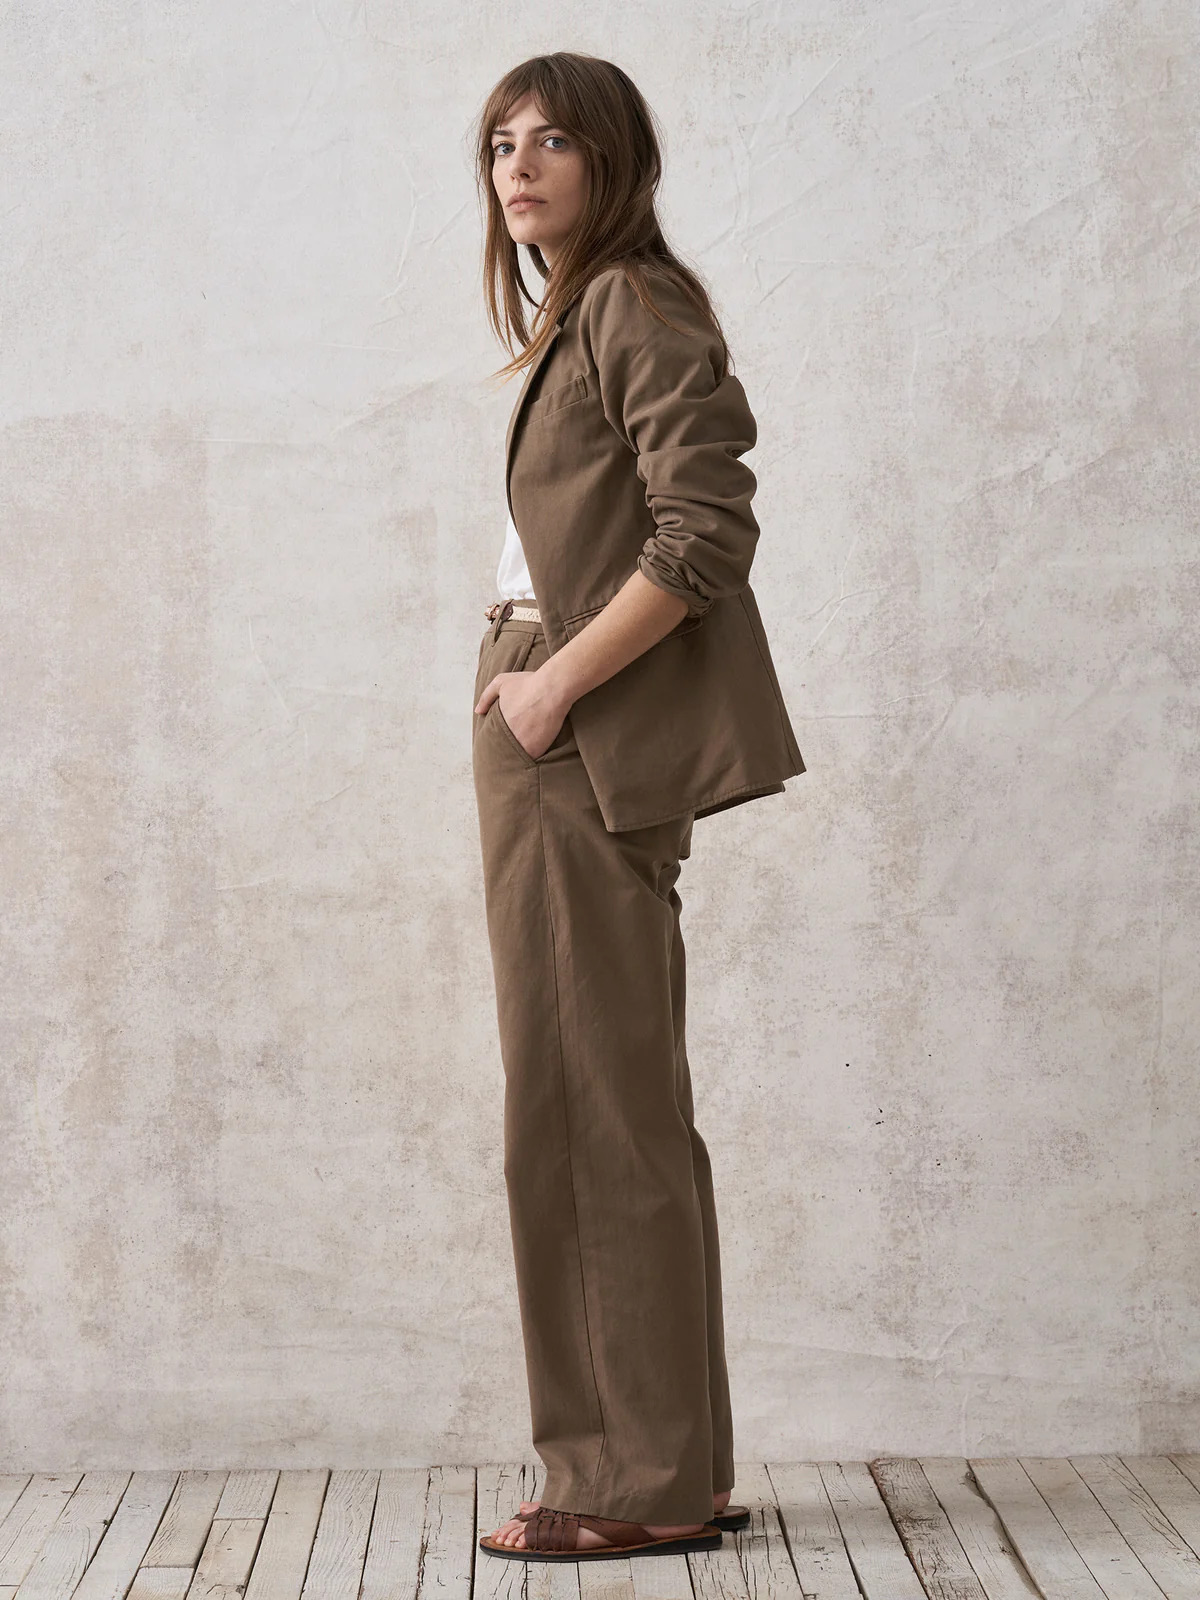 The model is wearing a tan blazer and pants.